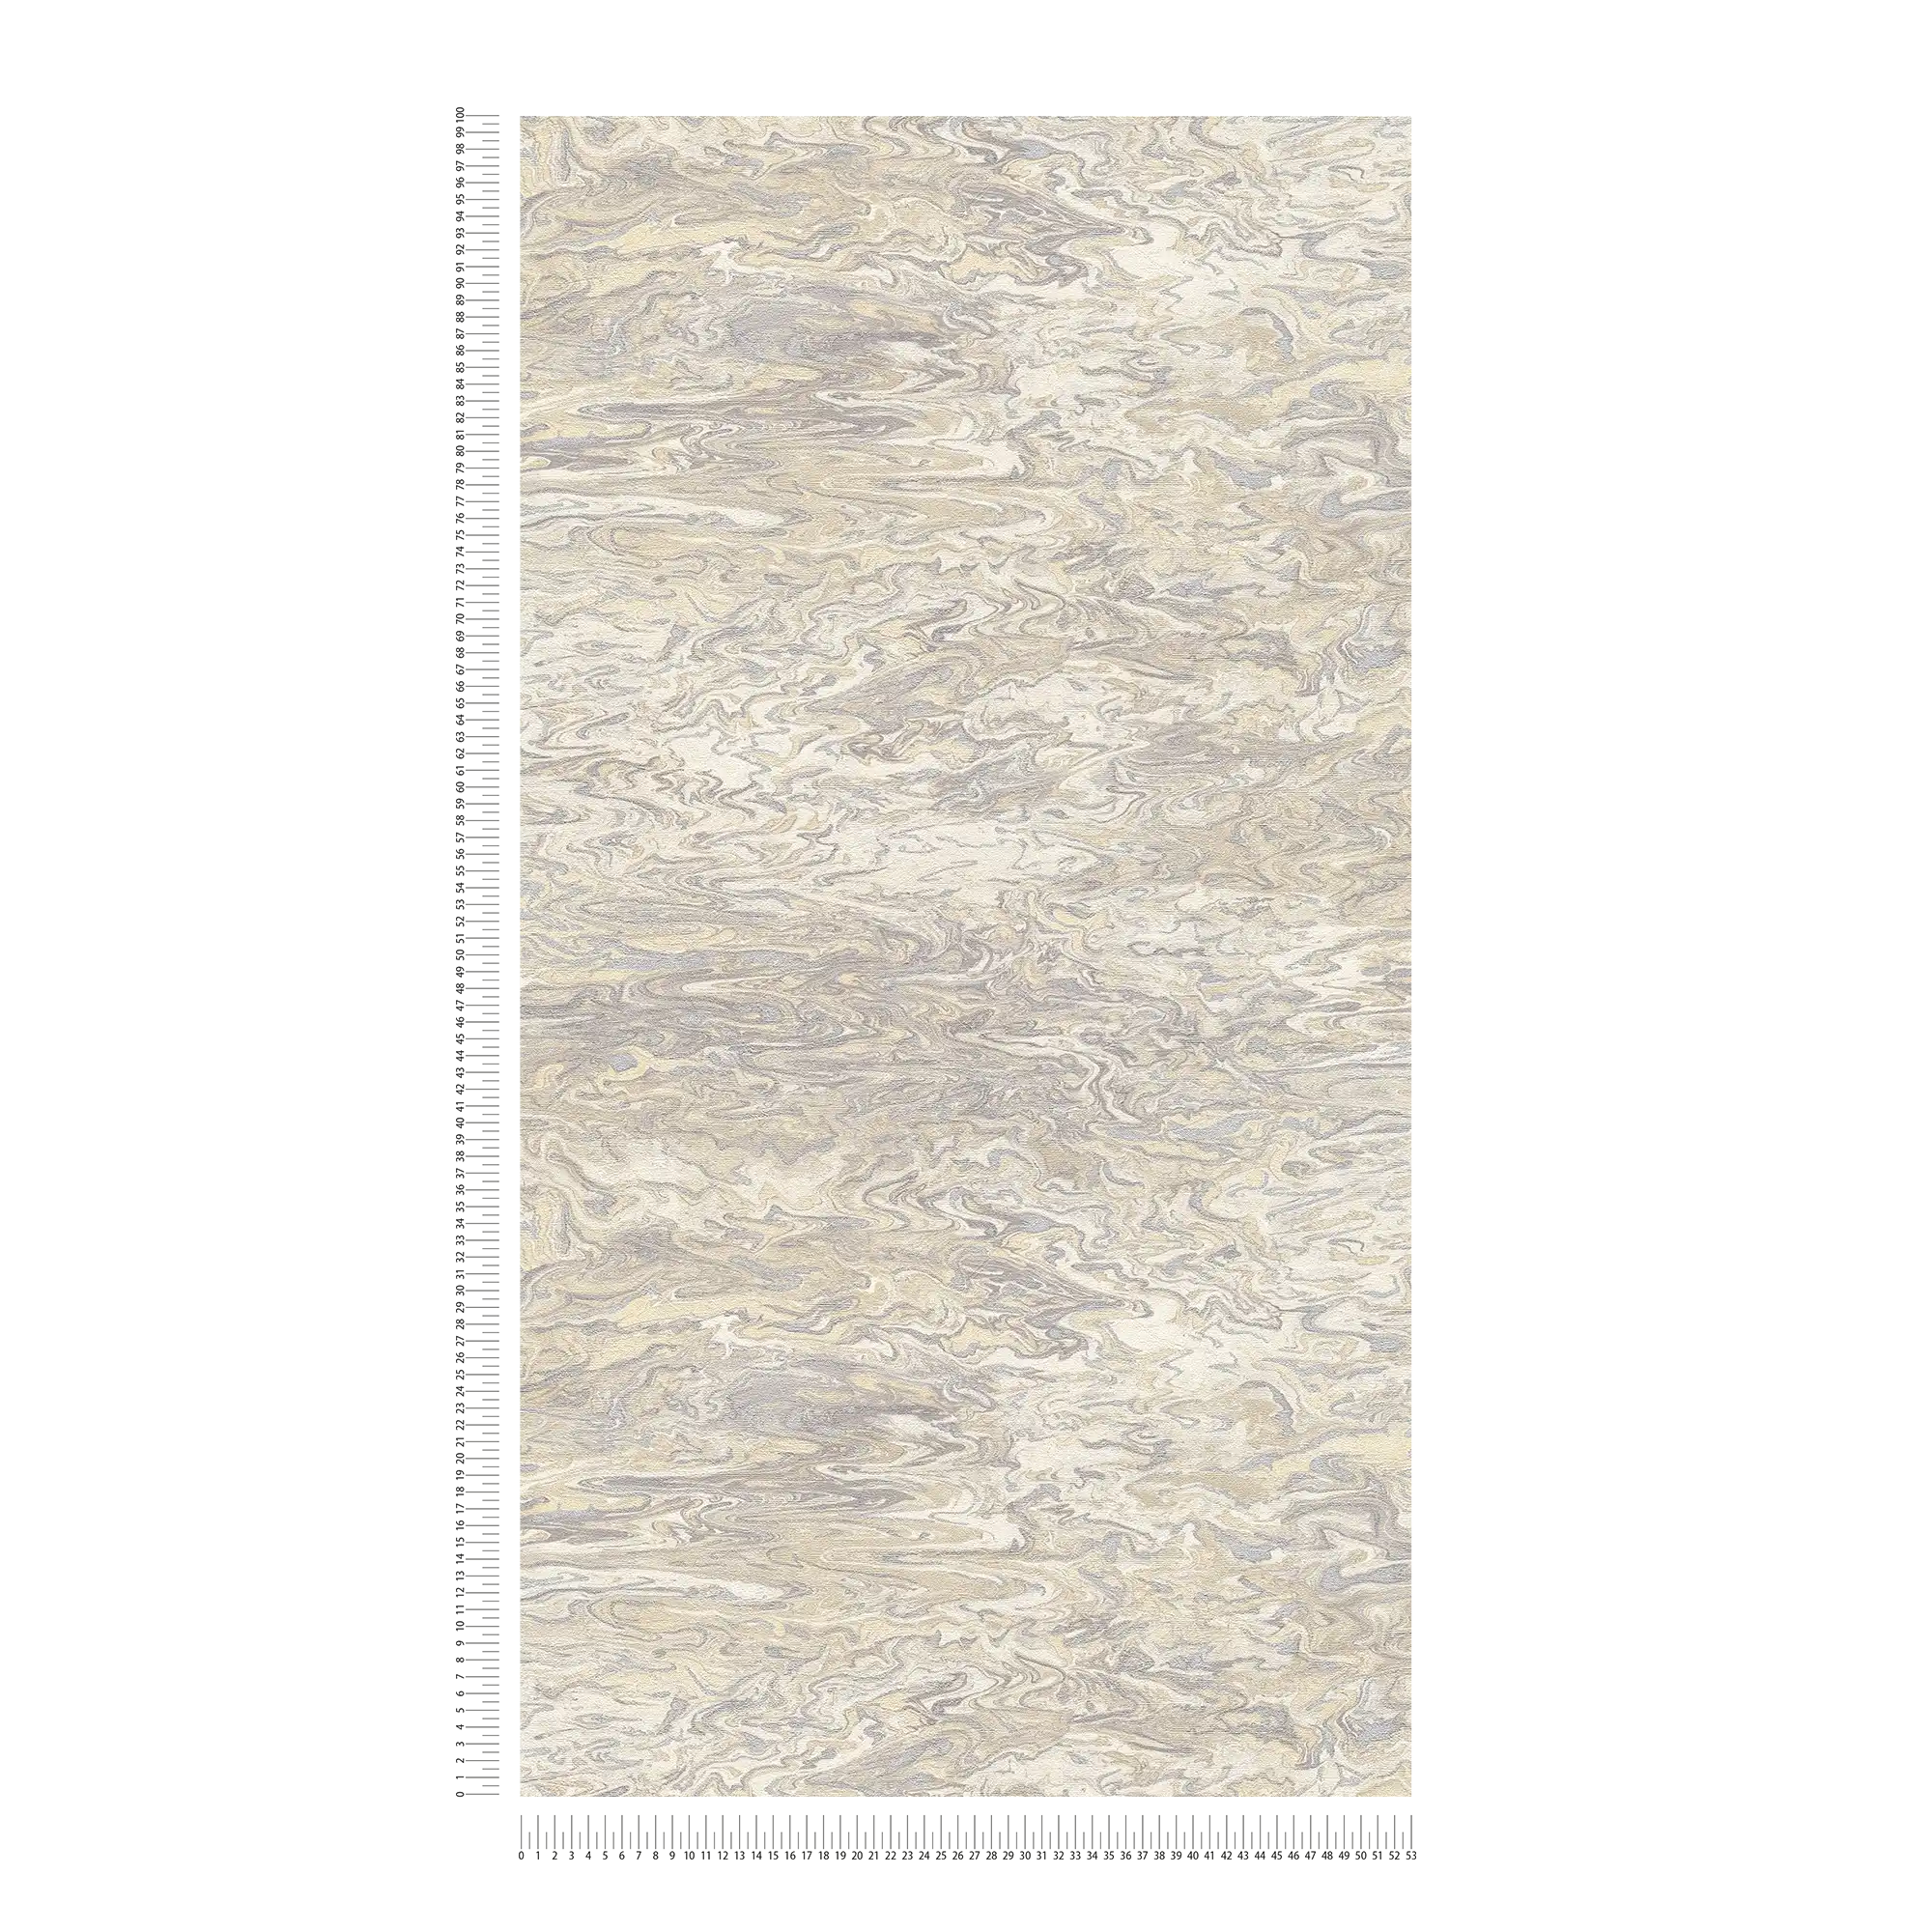             Marbled wallpaper Marble Paper effect - white, beige, cream
        